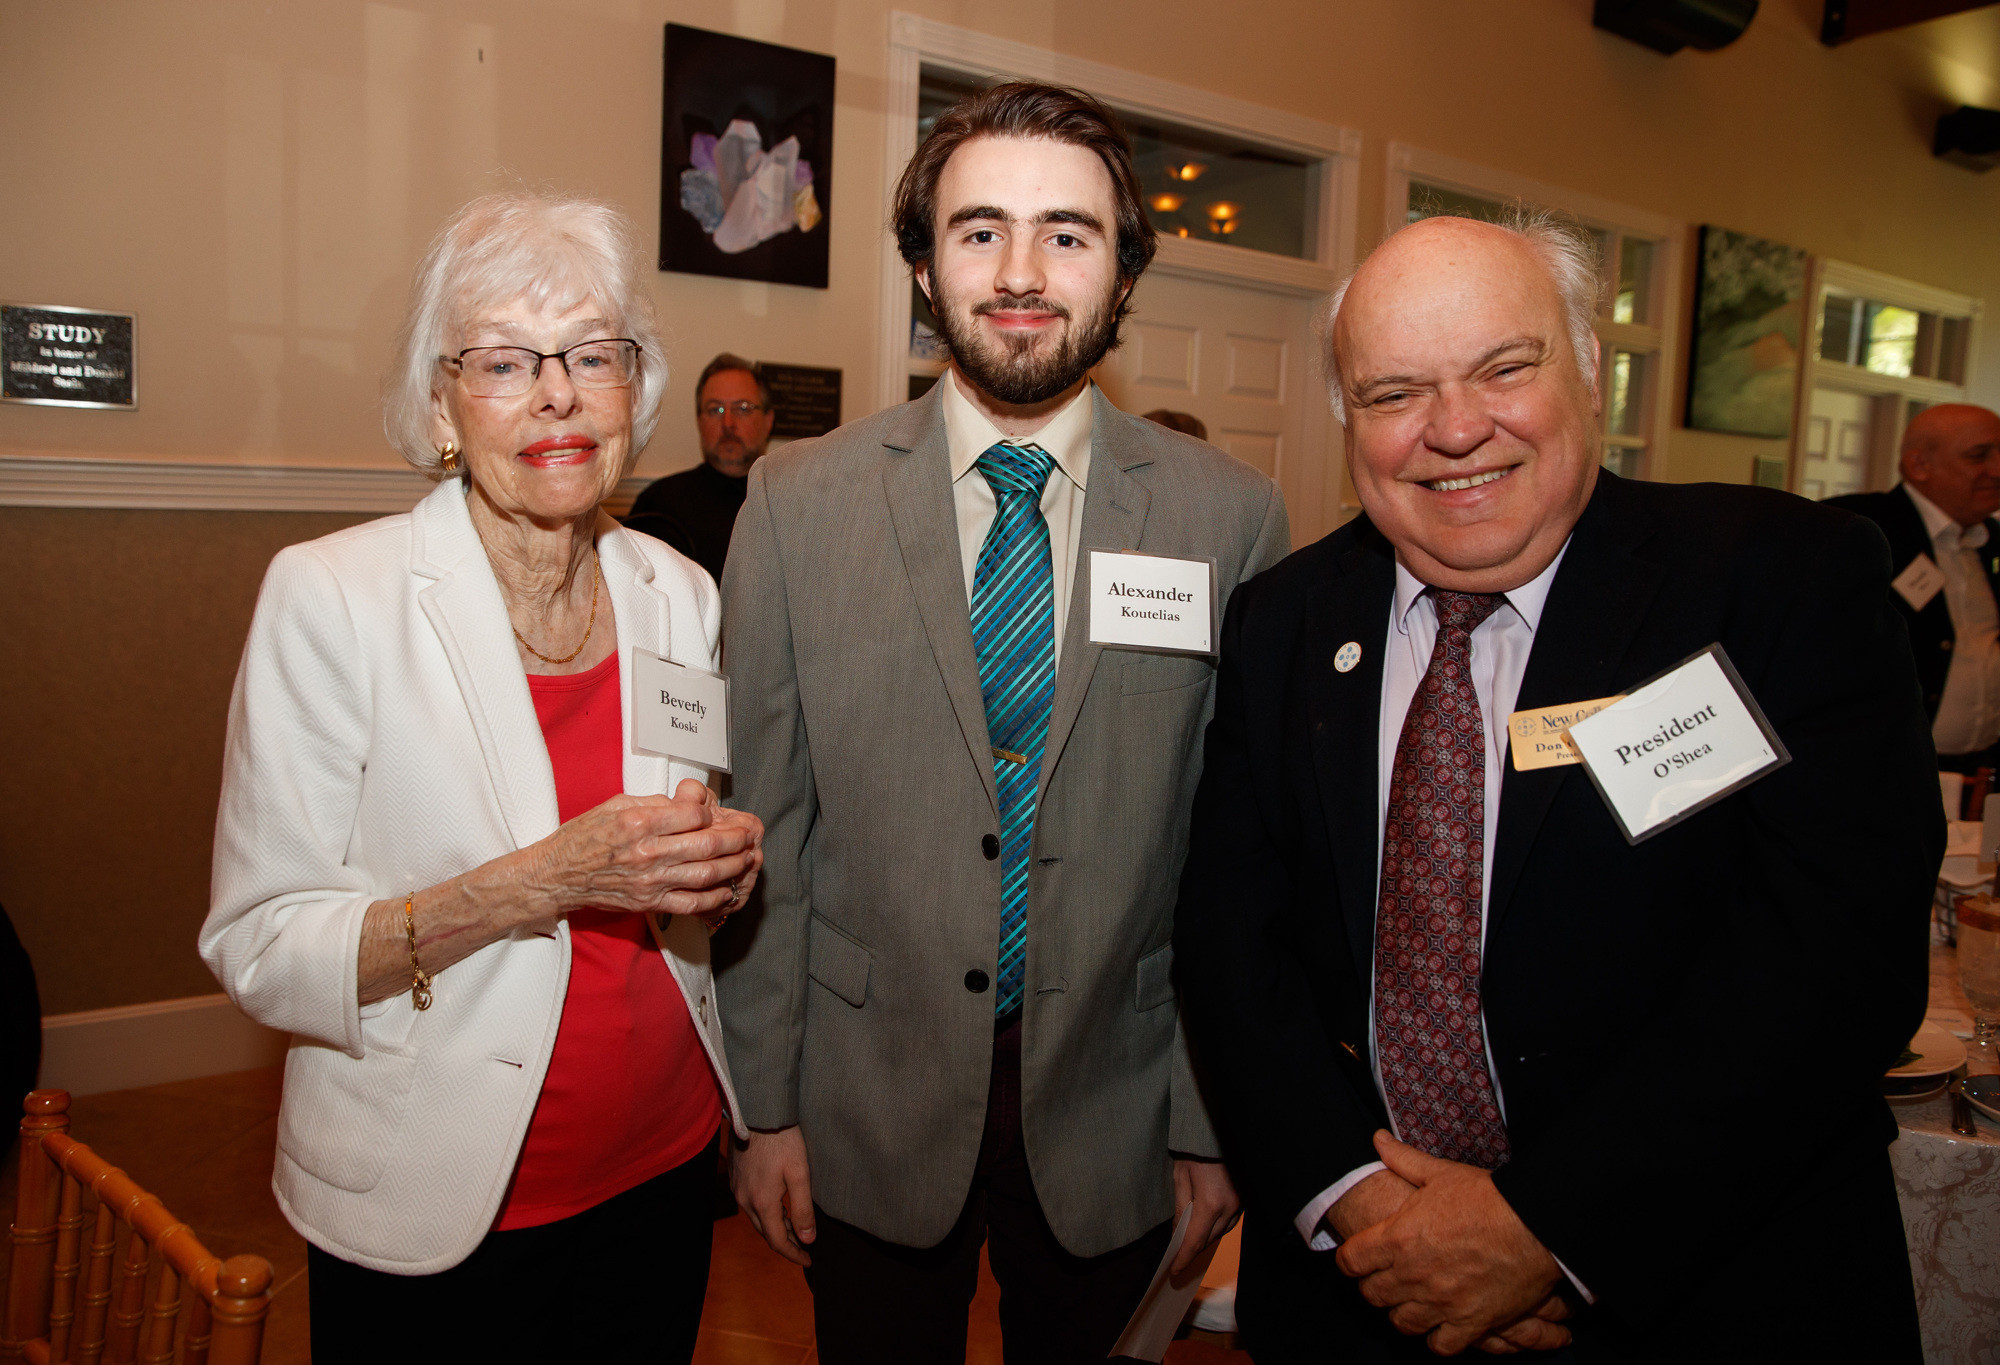 Beverly Koski, New College student Alexander Koutelias and New College President Don O’Shea. Photo by Casey Brooke Lawson.